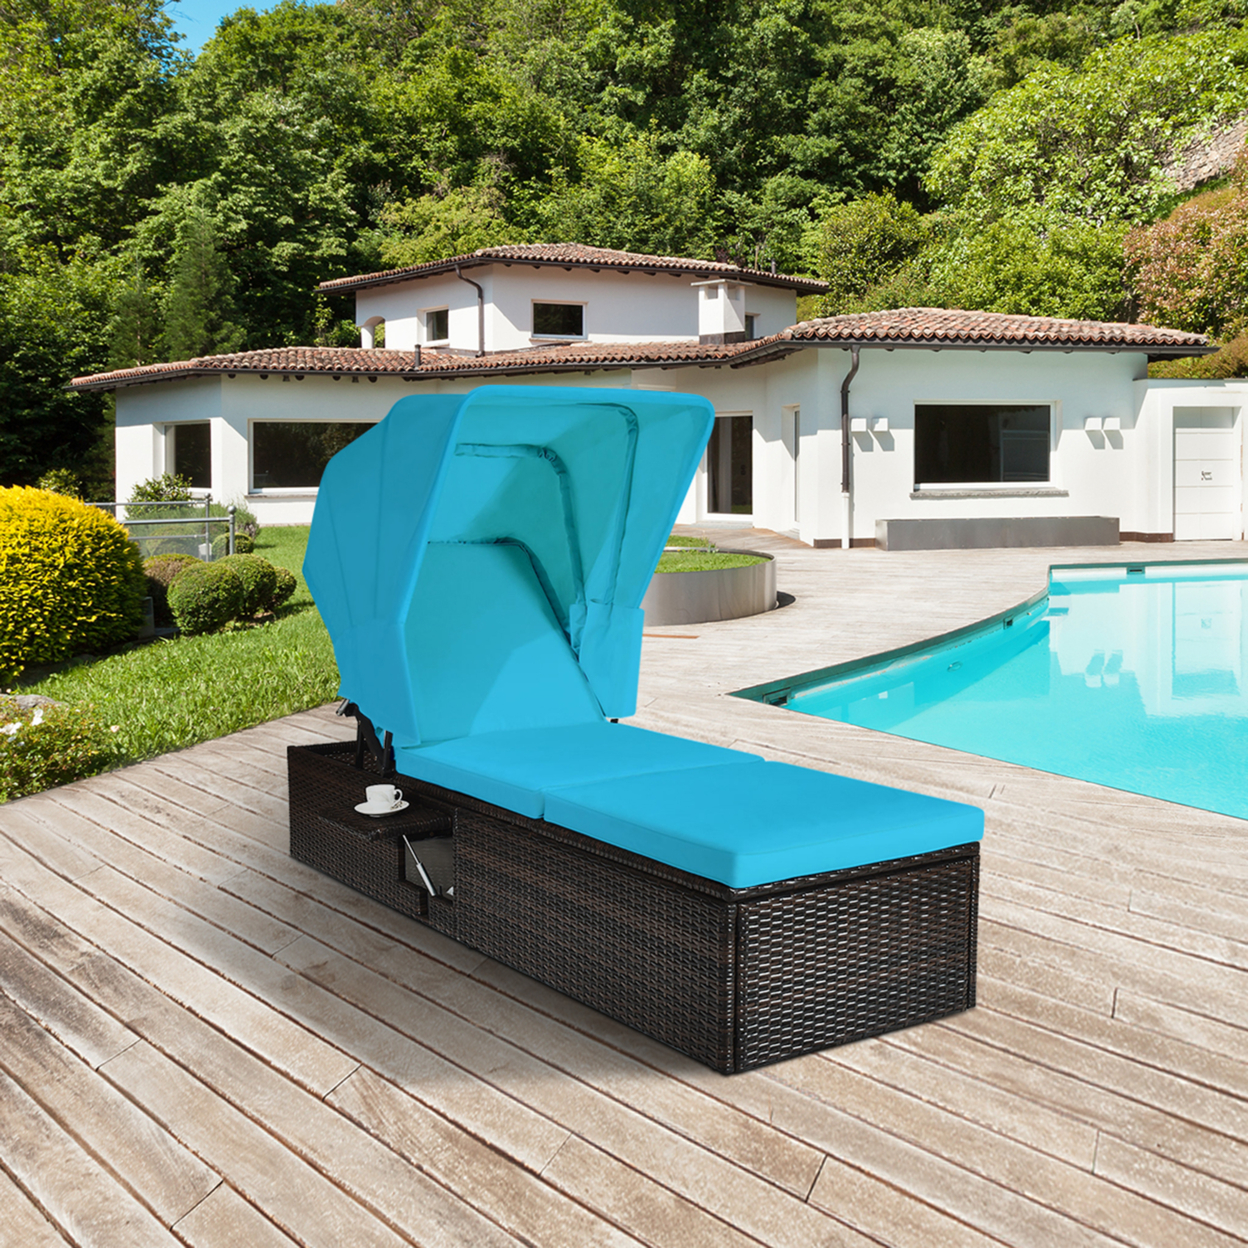 Rattan Patio Chaise Lounge Chair W/ Adjustable Canopy Turquoise Cushion